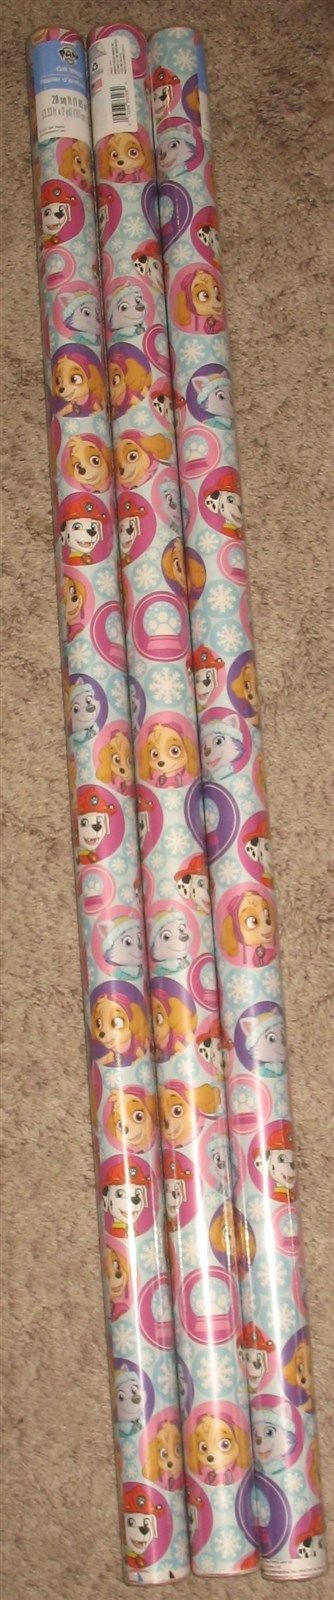 NEW Pale Blue & Pink Paw Patrol Nick Christmas Gift Wrapping Paper 3Rl=60sqft